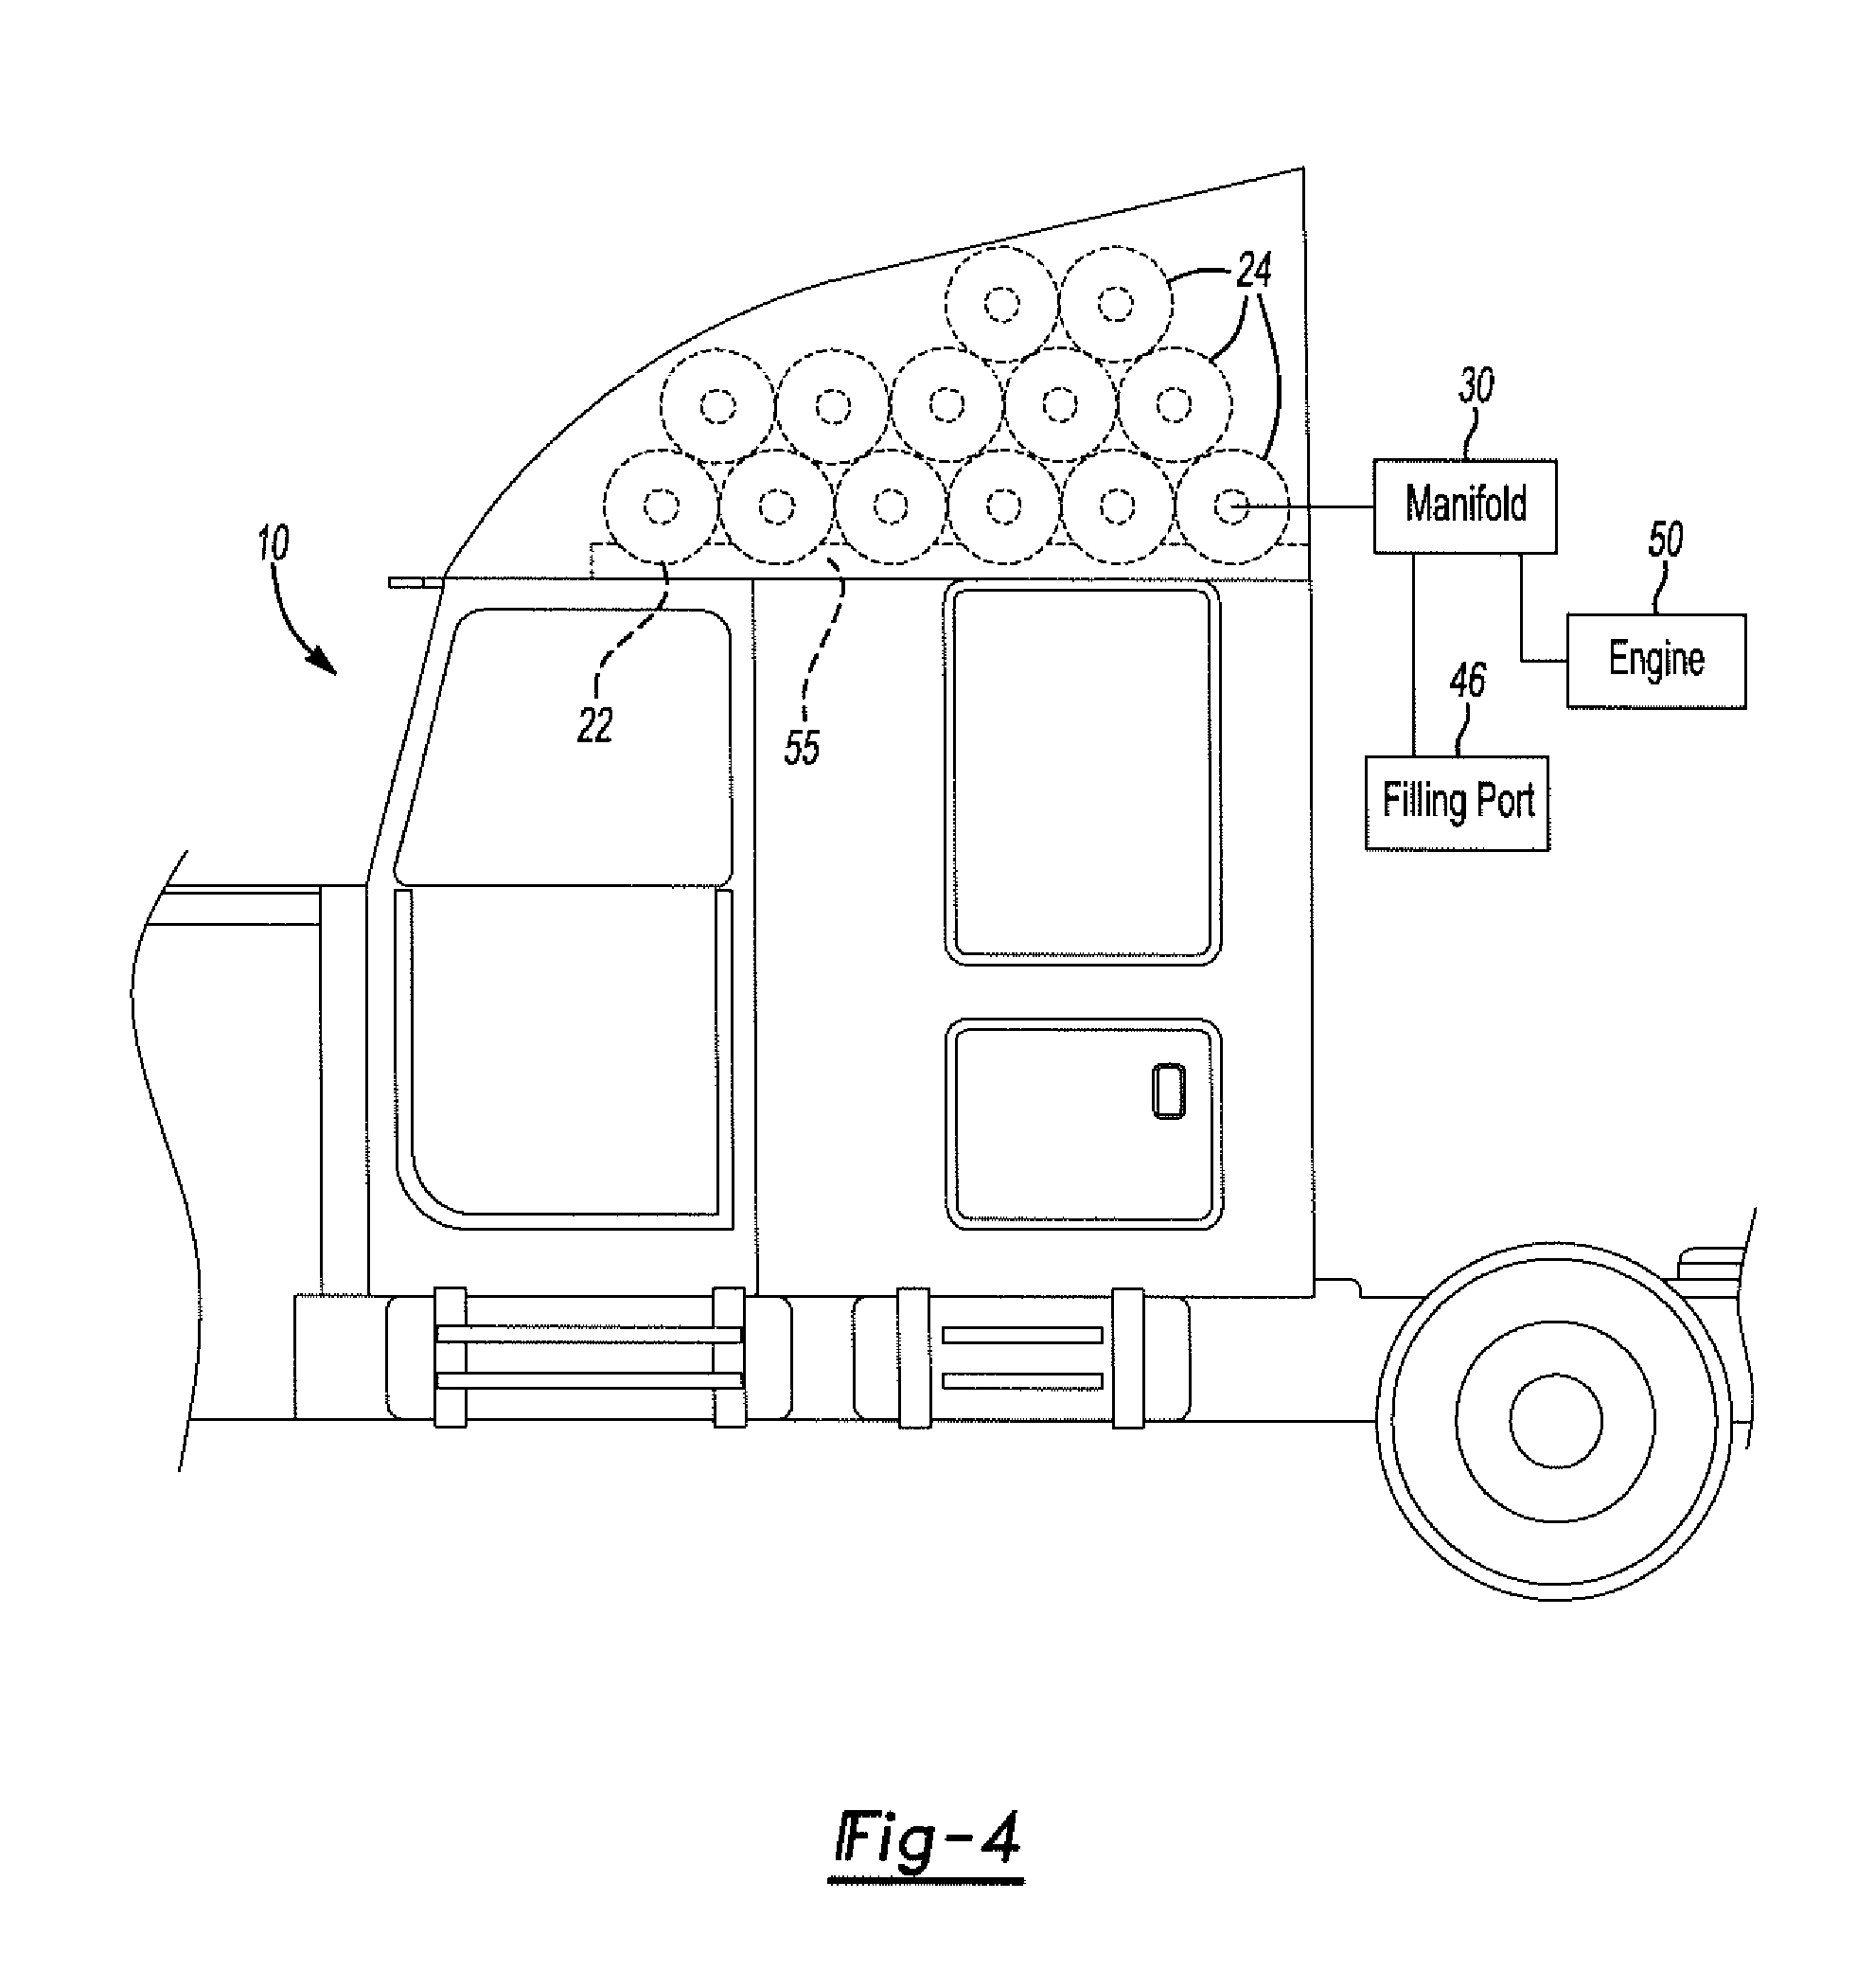 Method and apparatus for mounting cng/ang tanks to heavy trucks